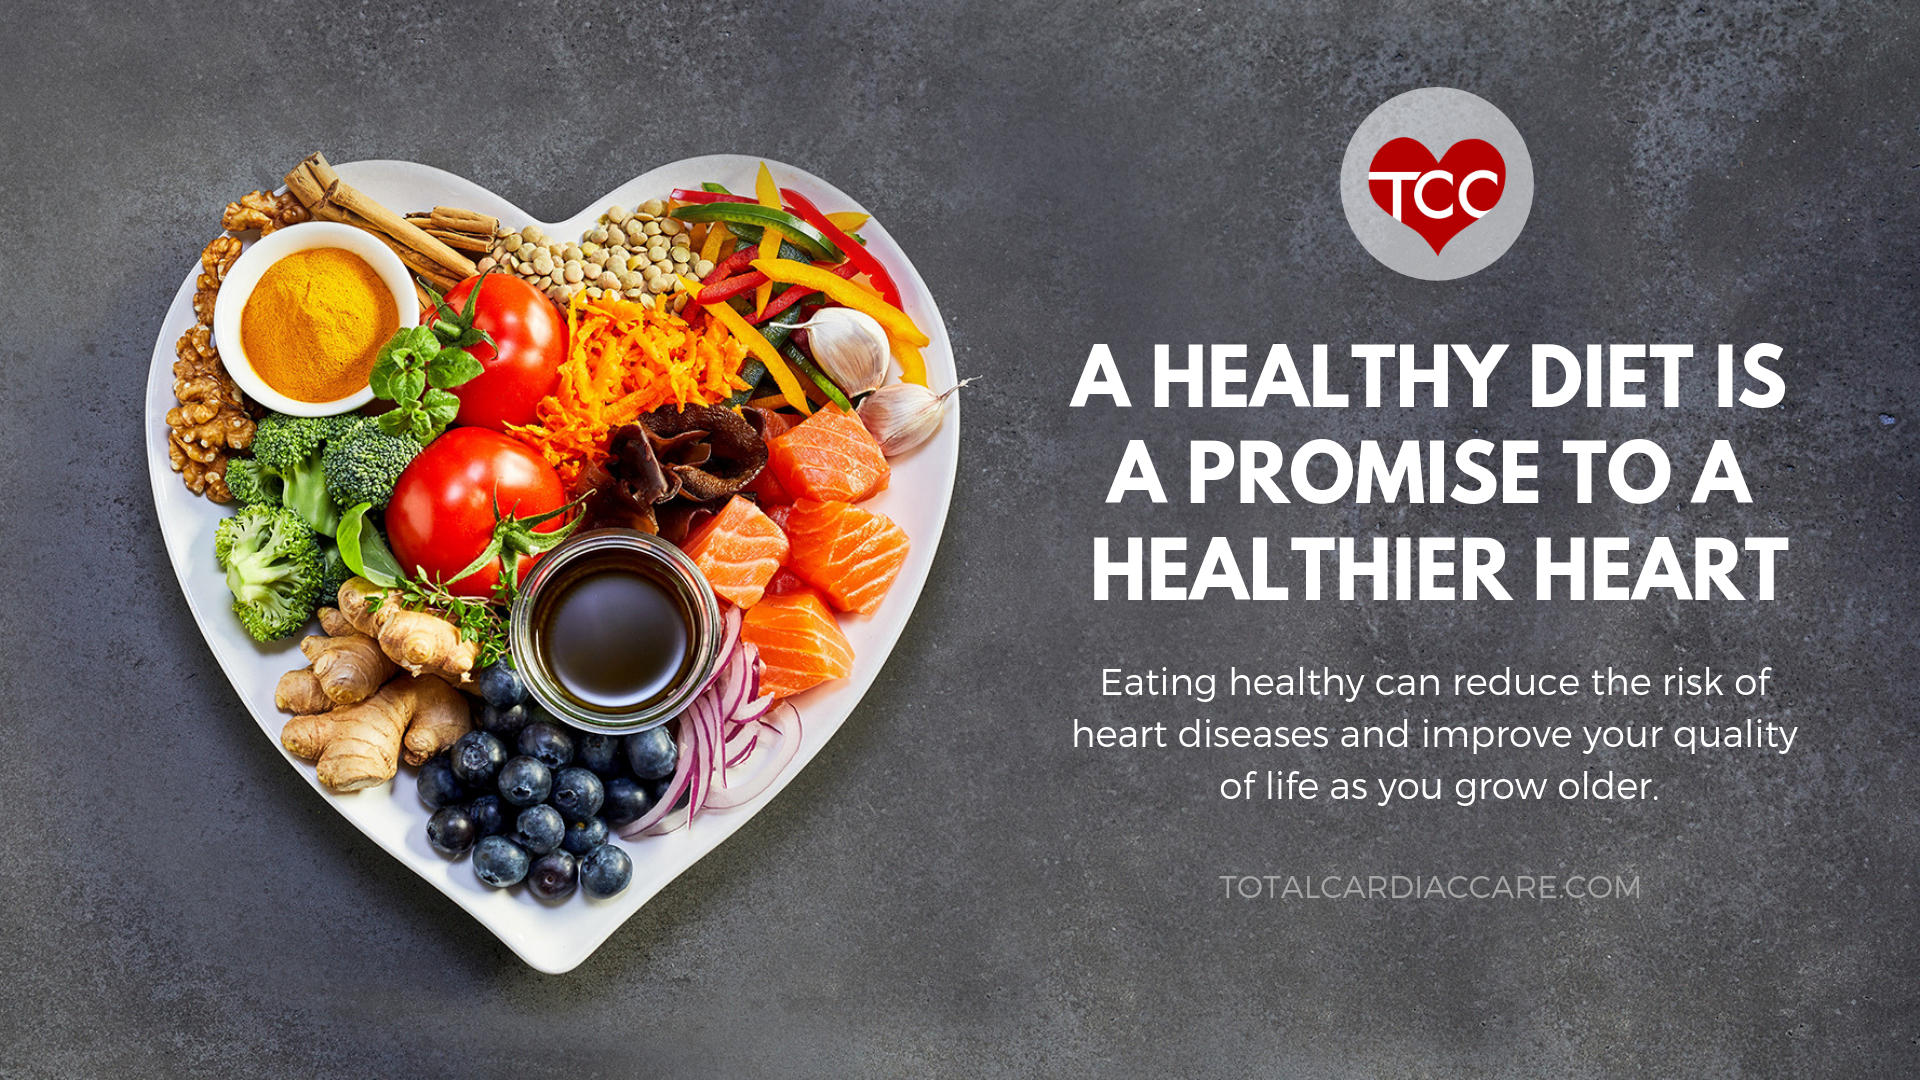 Healthy Food & Heart Health -Total Cardiac Care - Eating healthy can reduce the risk of heart diseases and improve your quality of life as you grow older - A healthy diet is a promise to a healthier heart - heart healthy food 